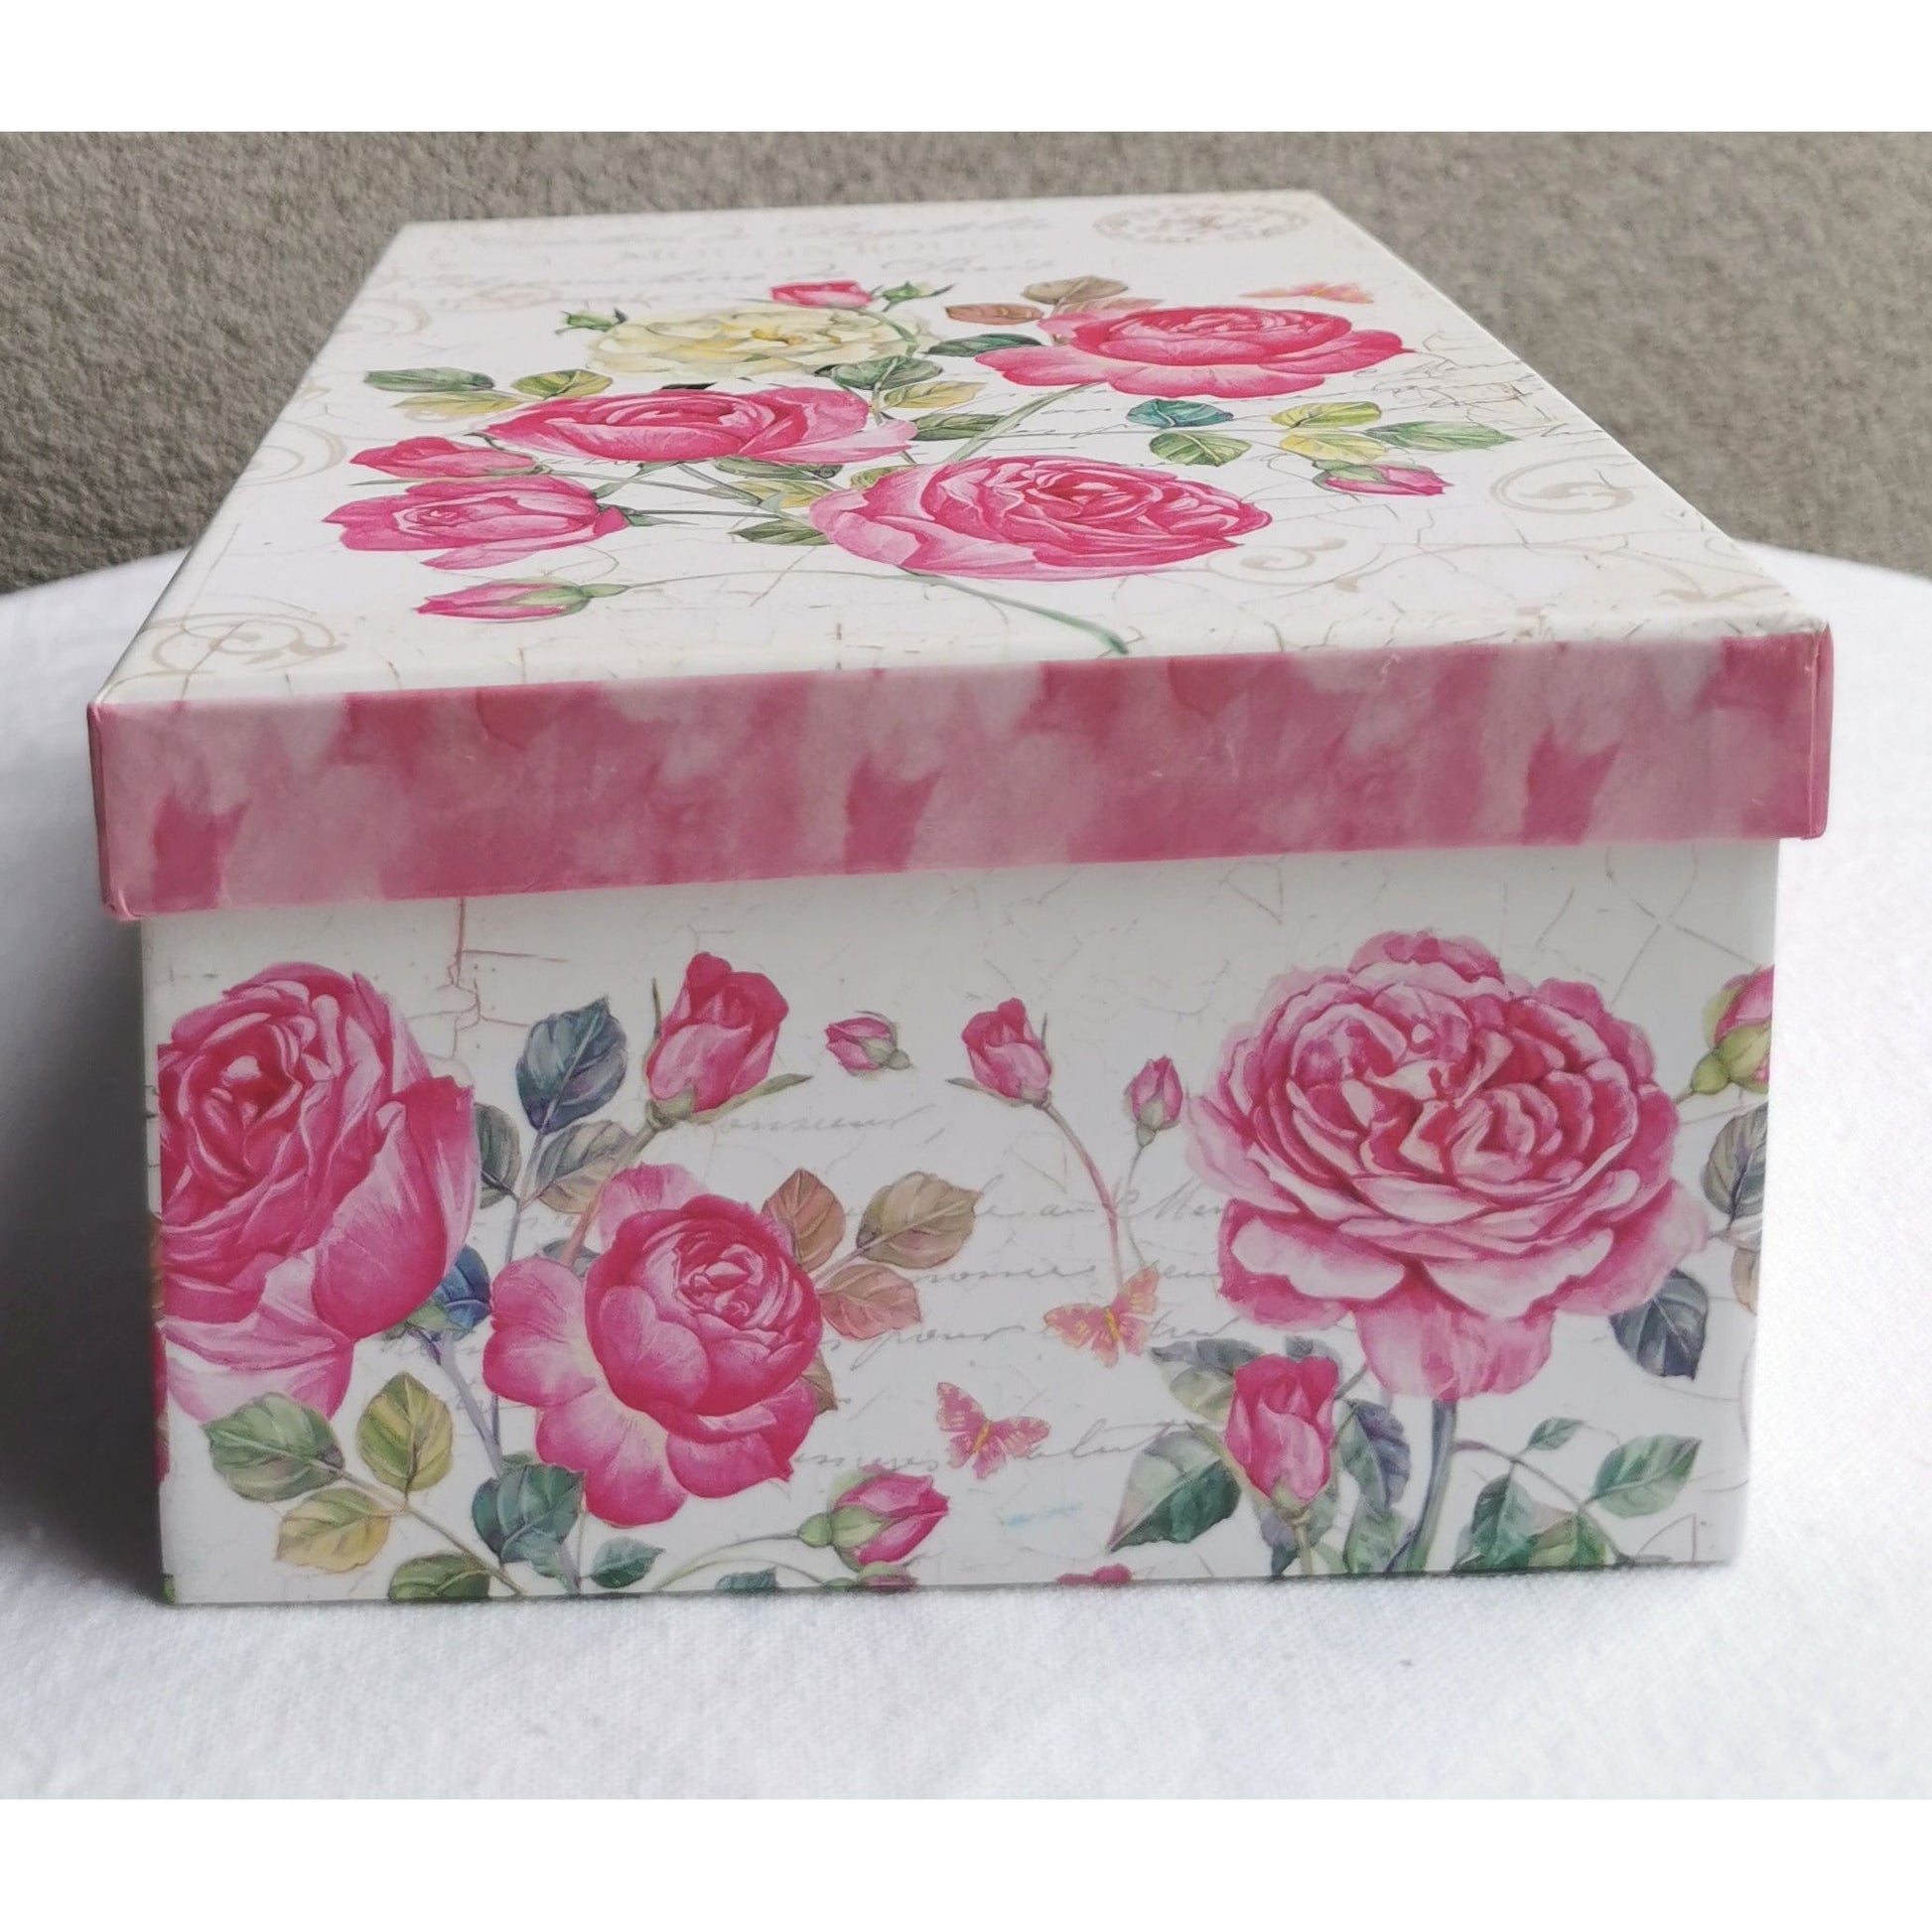 Photo is of a floral gift box